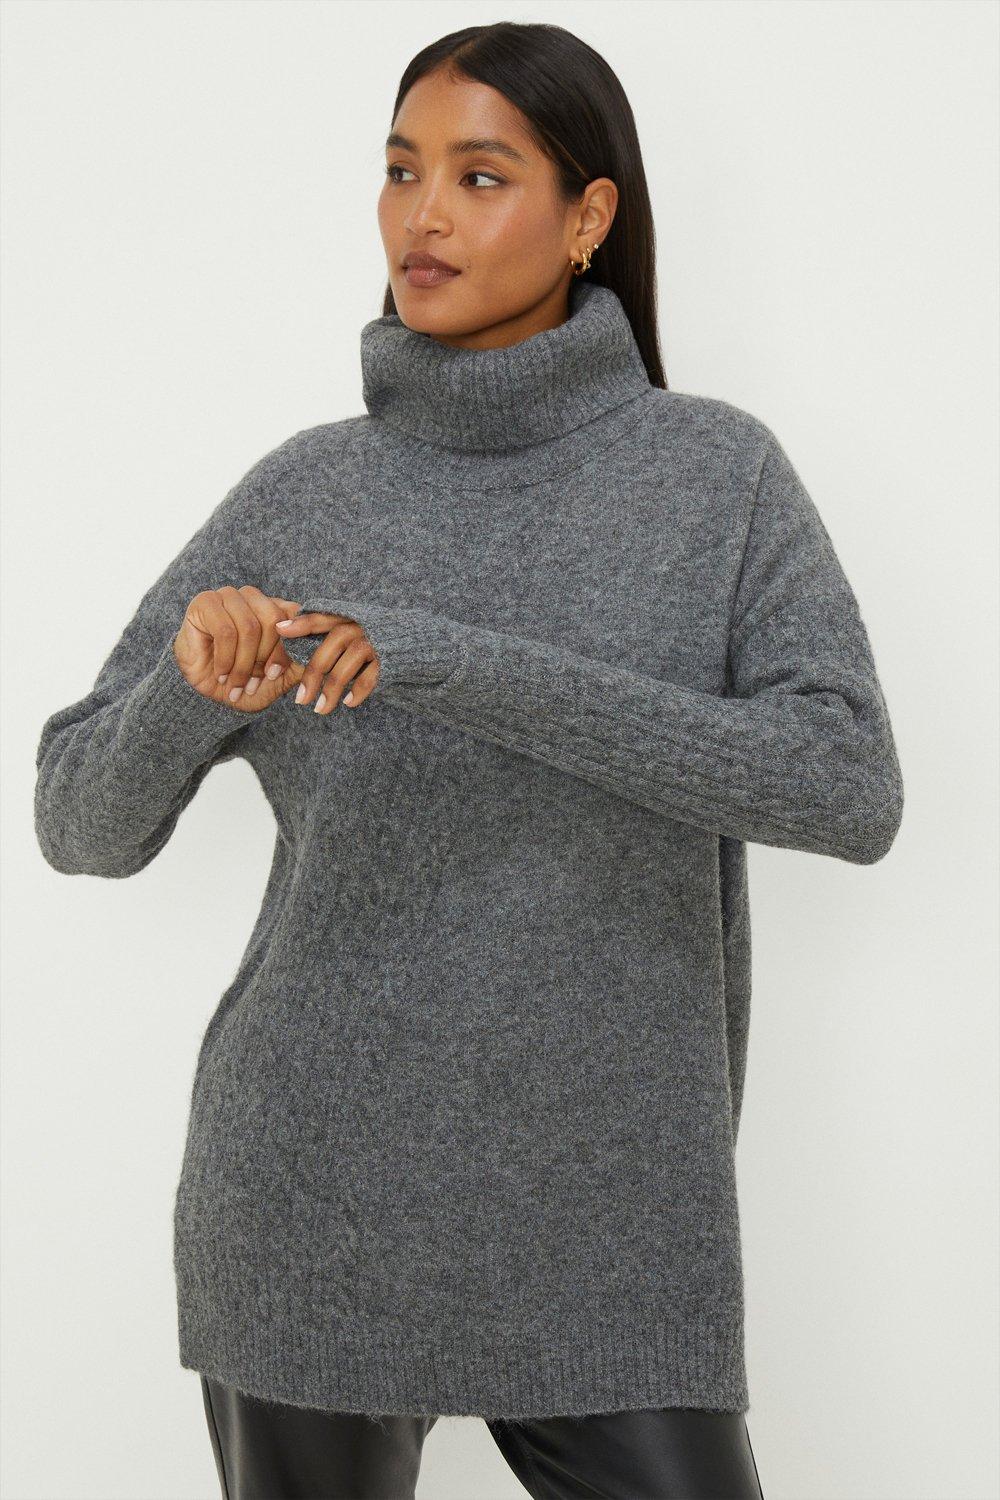 Women’s Longline Angle Cable Jumper - grey marl - M